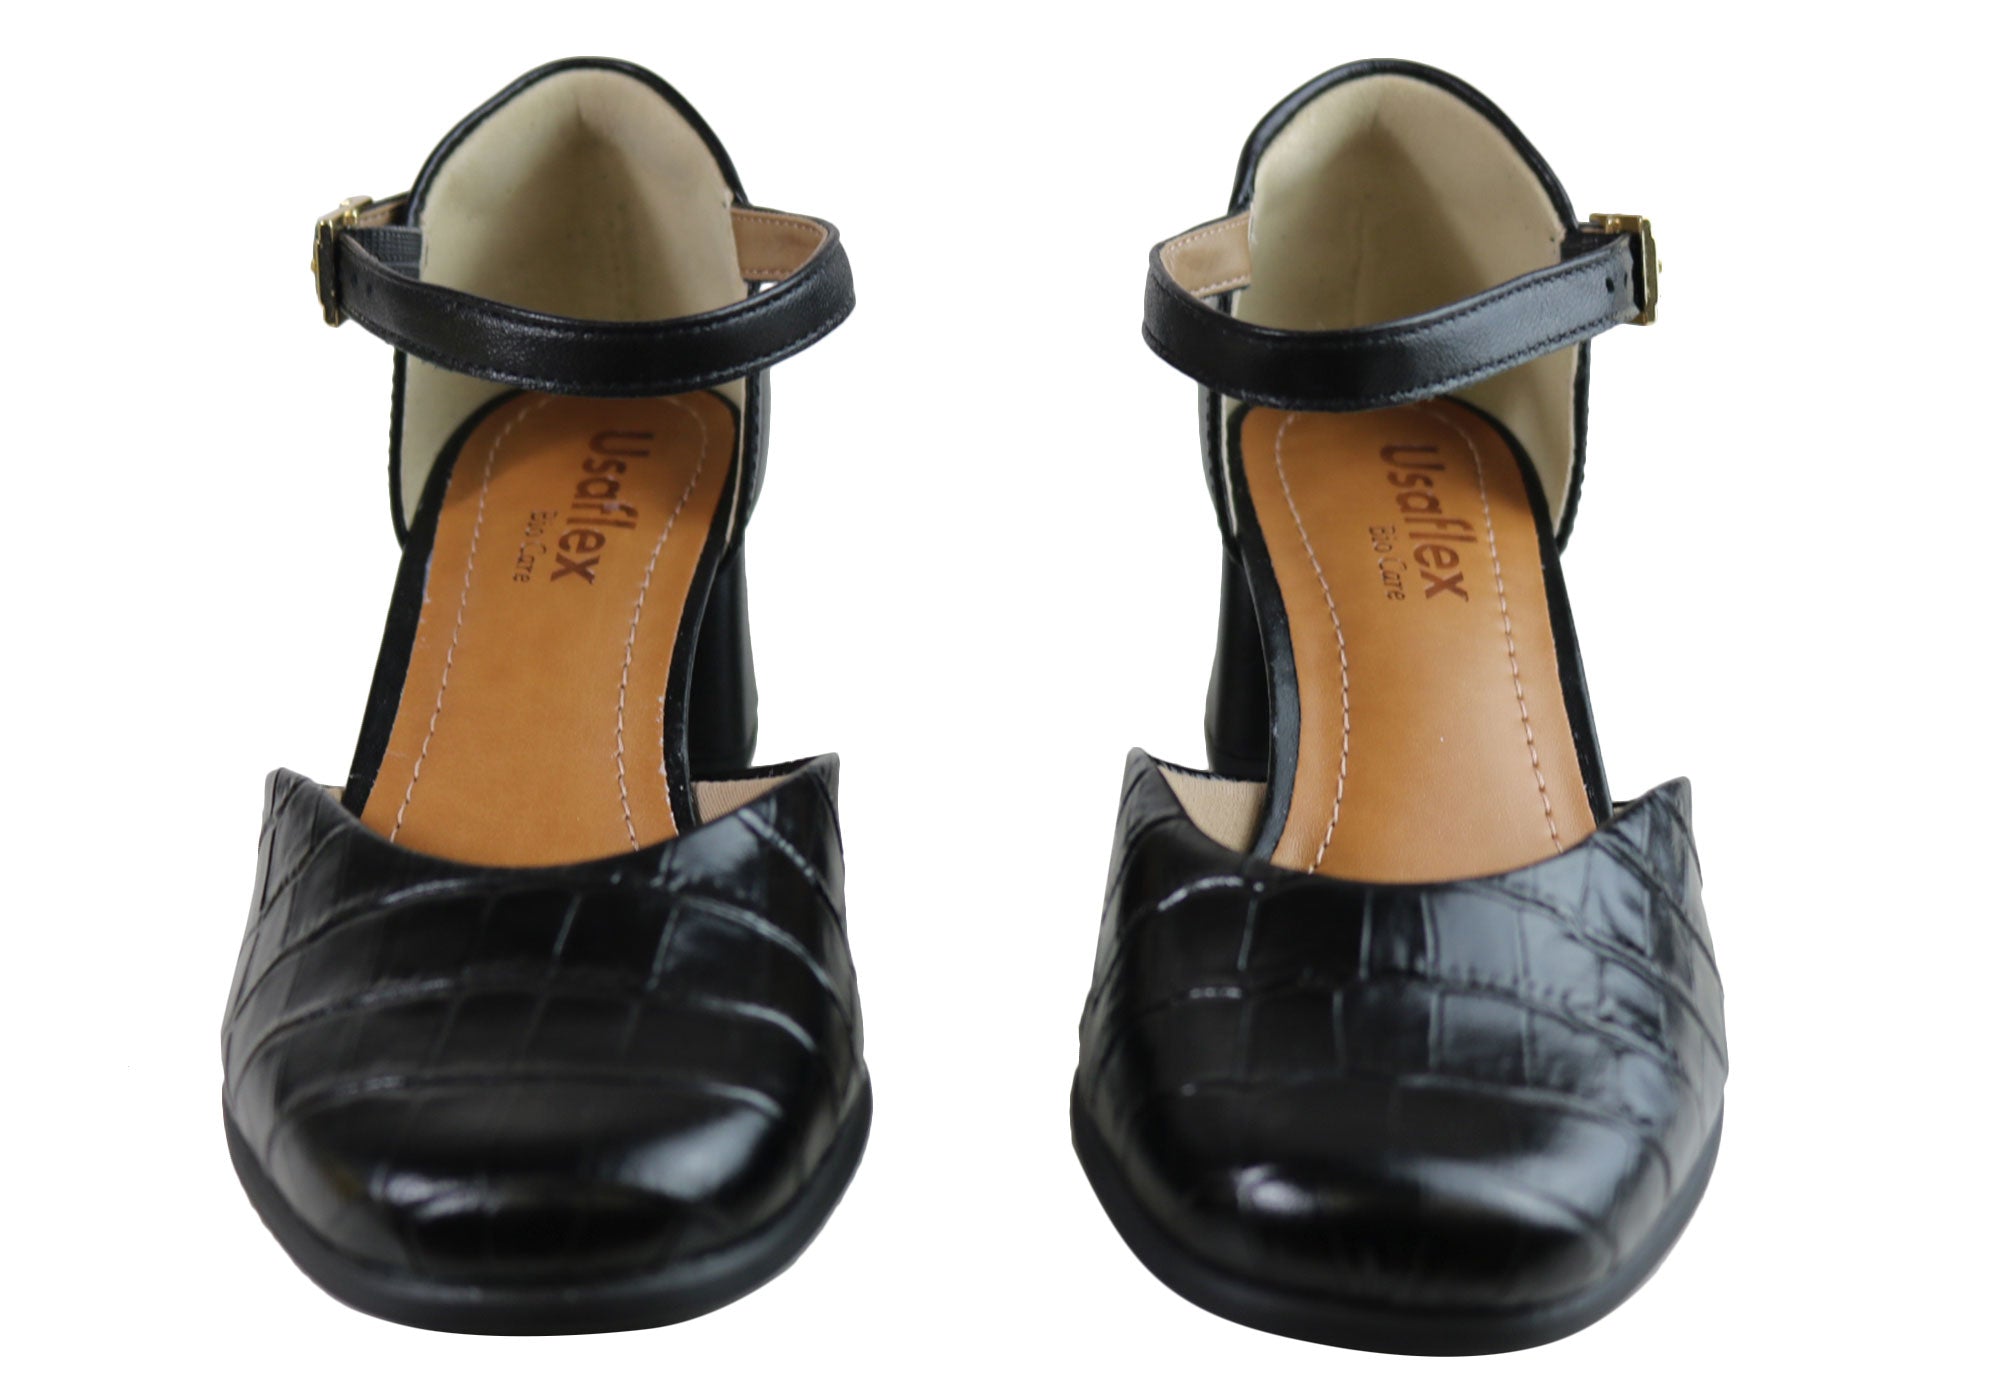 Usaflex Amaya Womens Mid Heel Leather Shoes Made In Brazil